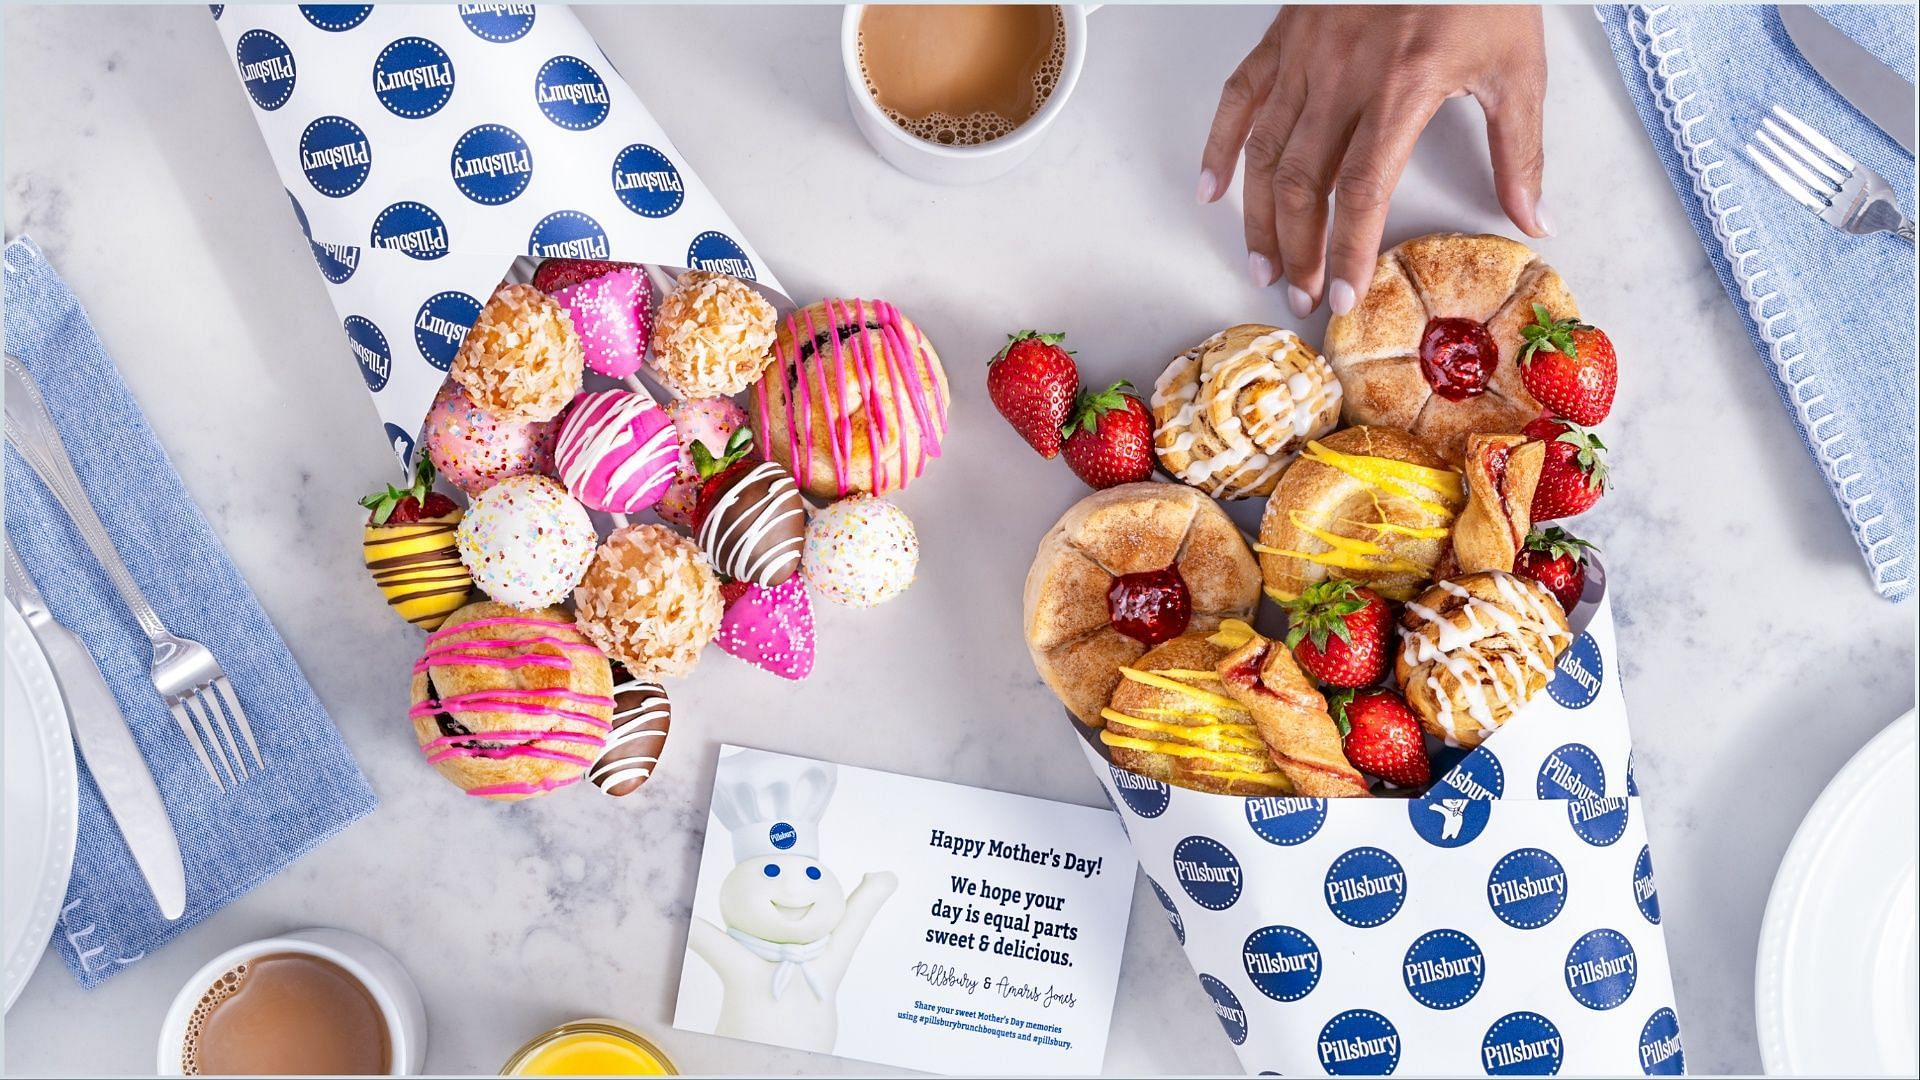 The new Brunch Bouquets are available for purchase and delivery exclusively in Miami for Mother&#039;s Day (Image via Pillsbury)